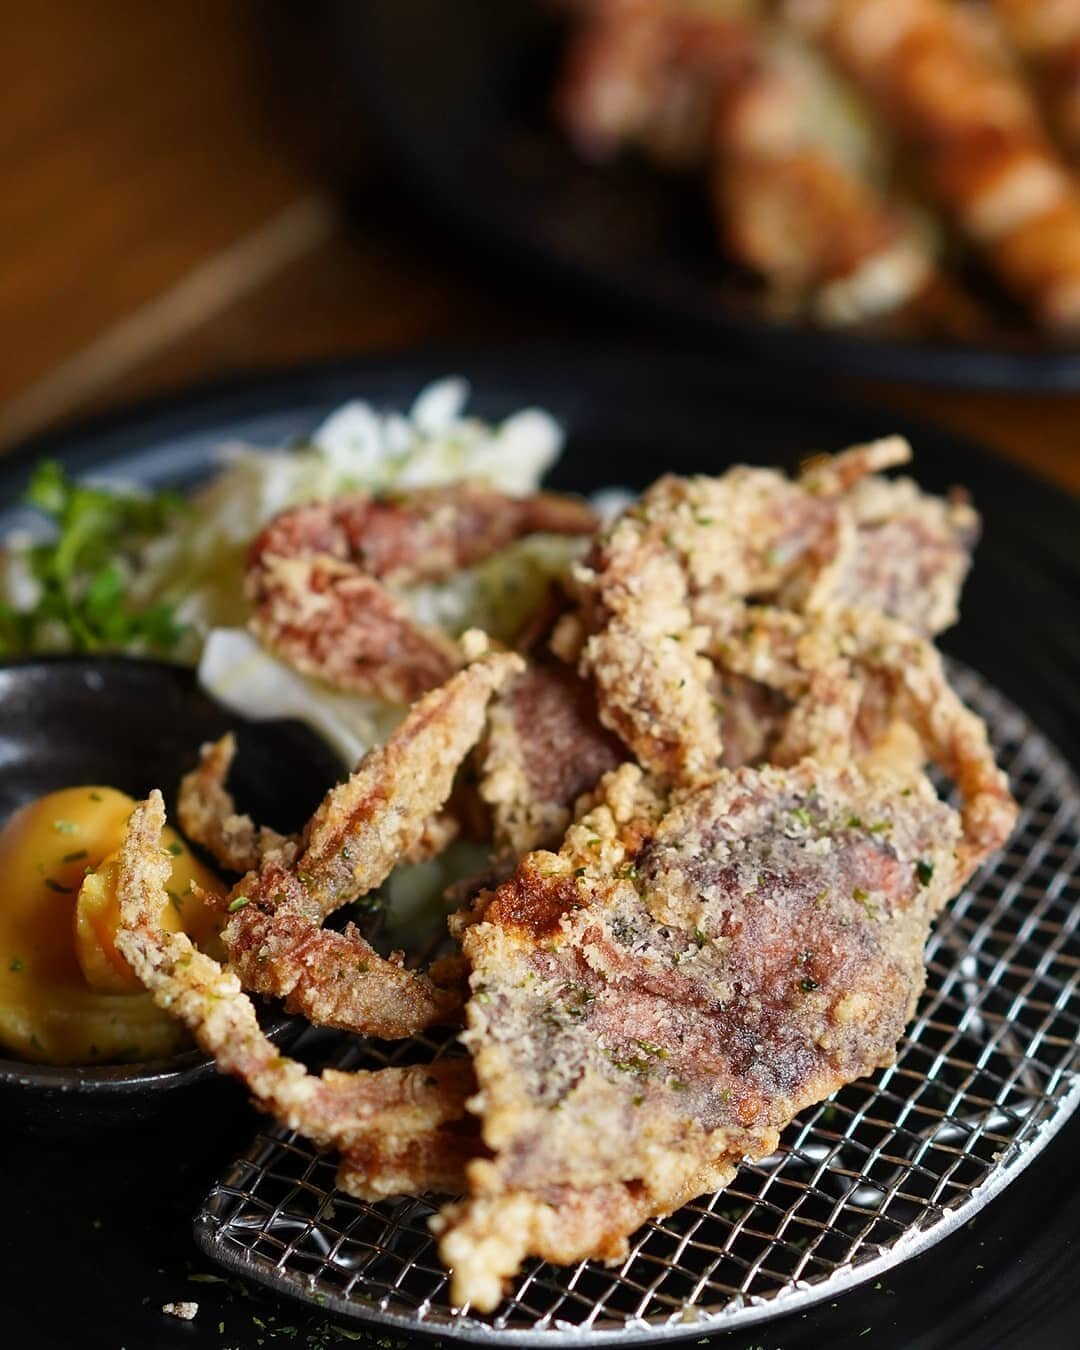 Watagani Fry is currently on Chef Daily!
Deep fried soft shell crab with white miso, perfect pair of our signature beers and sake!
➡️For our menu &amp; reservation please visit our website (Link in bio)
📸: @jackedjacky
.
.
.
#RoninIzakaya
#japanesei